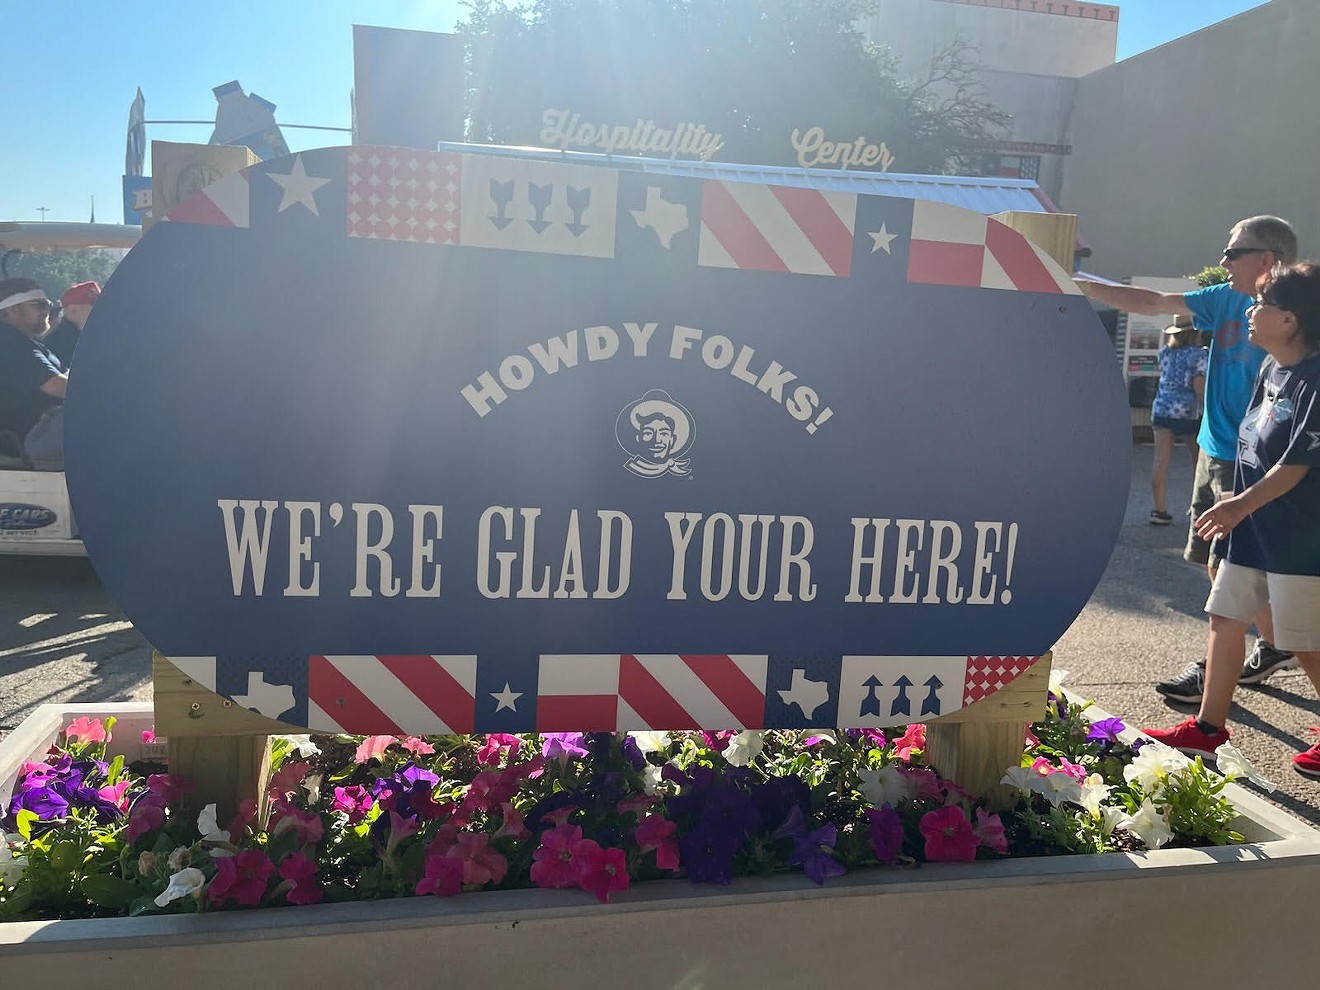 state_fair_sign_we_re_glad_your_here.jpg